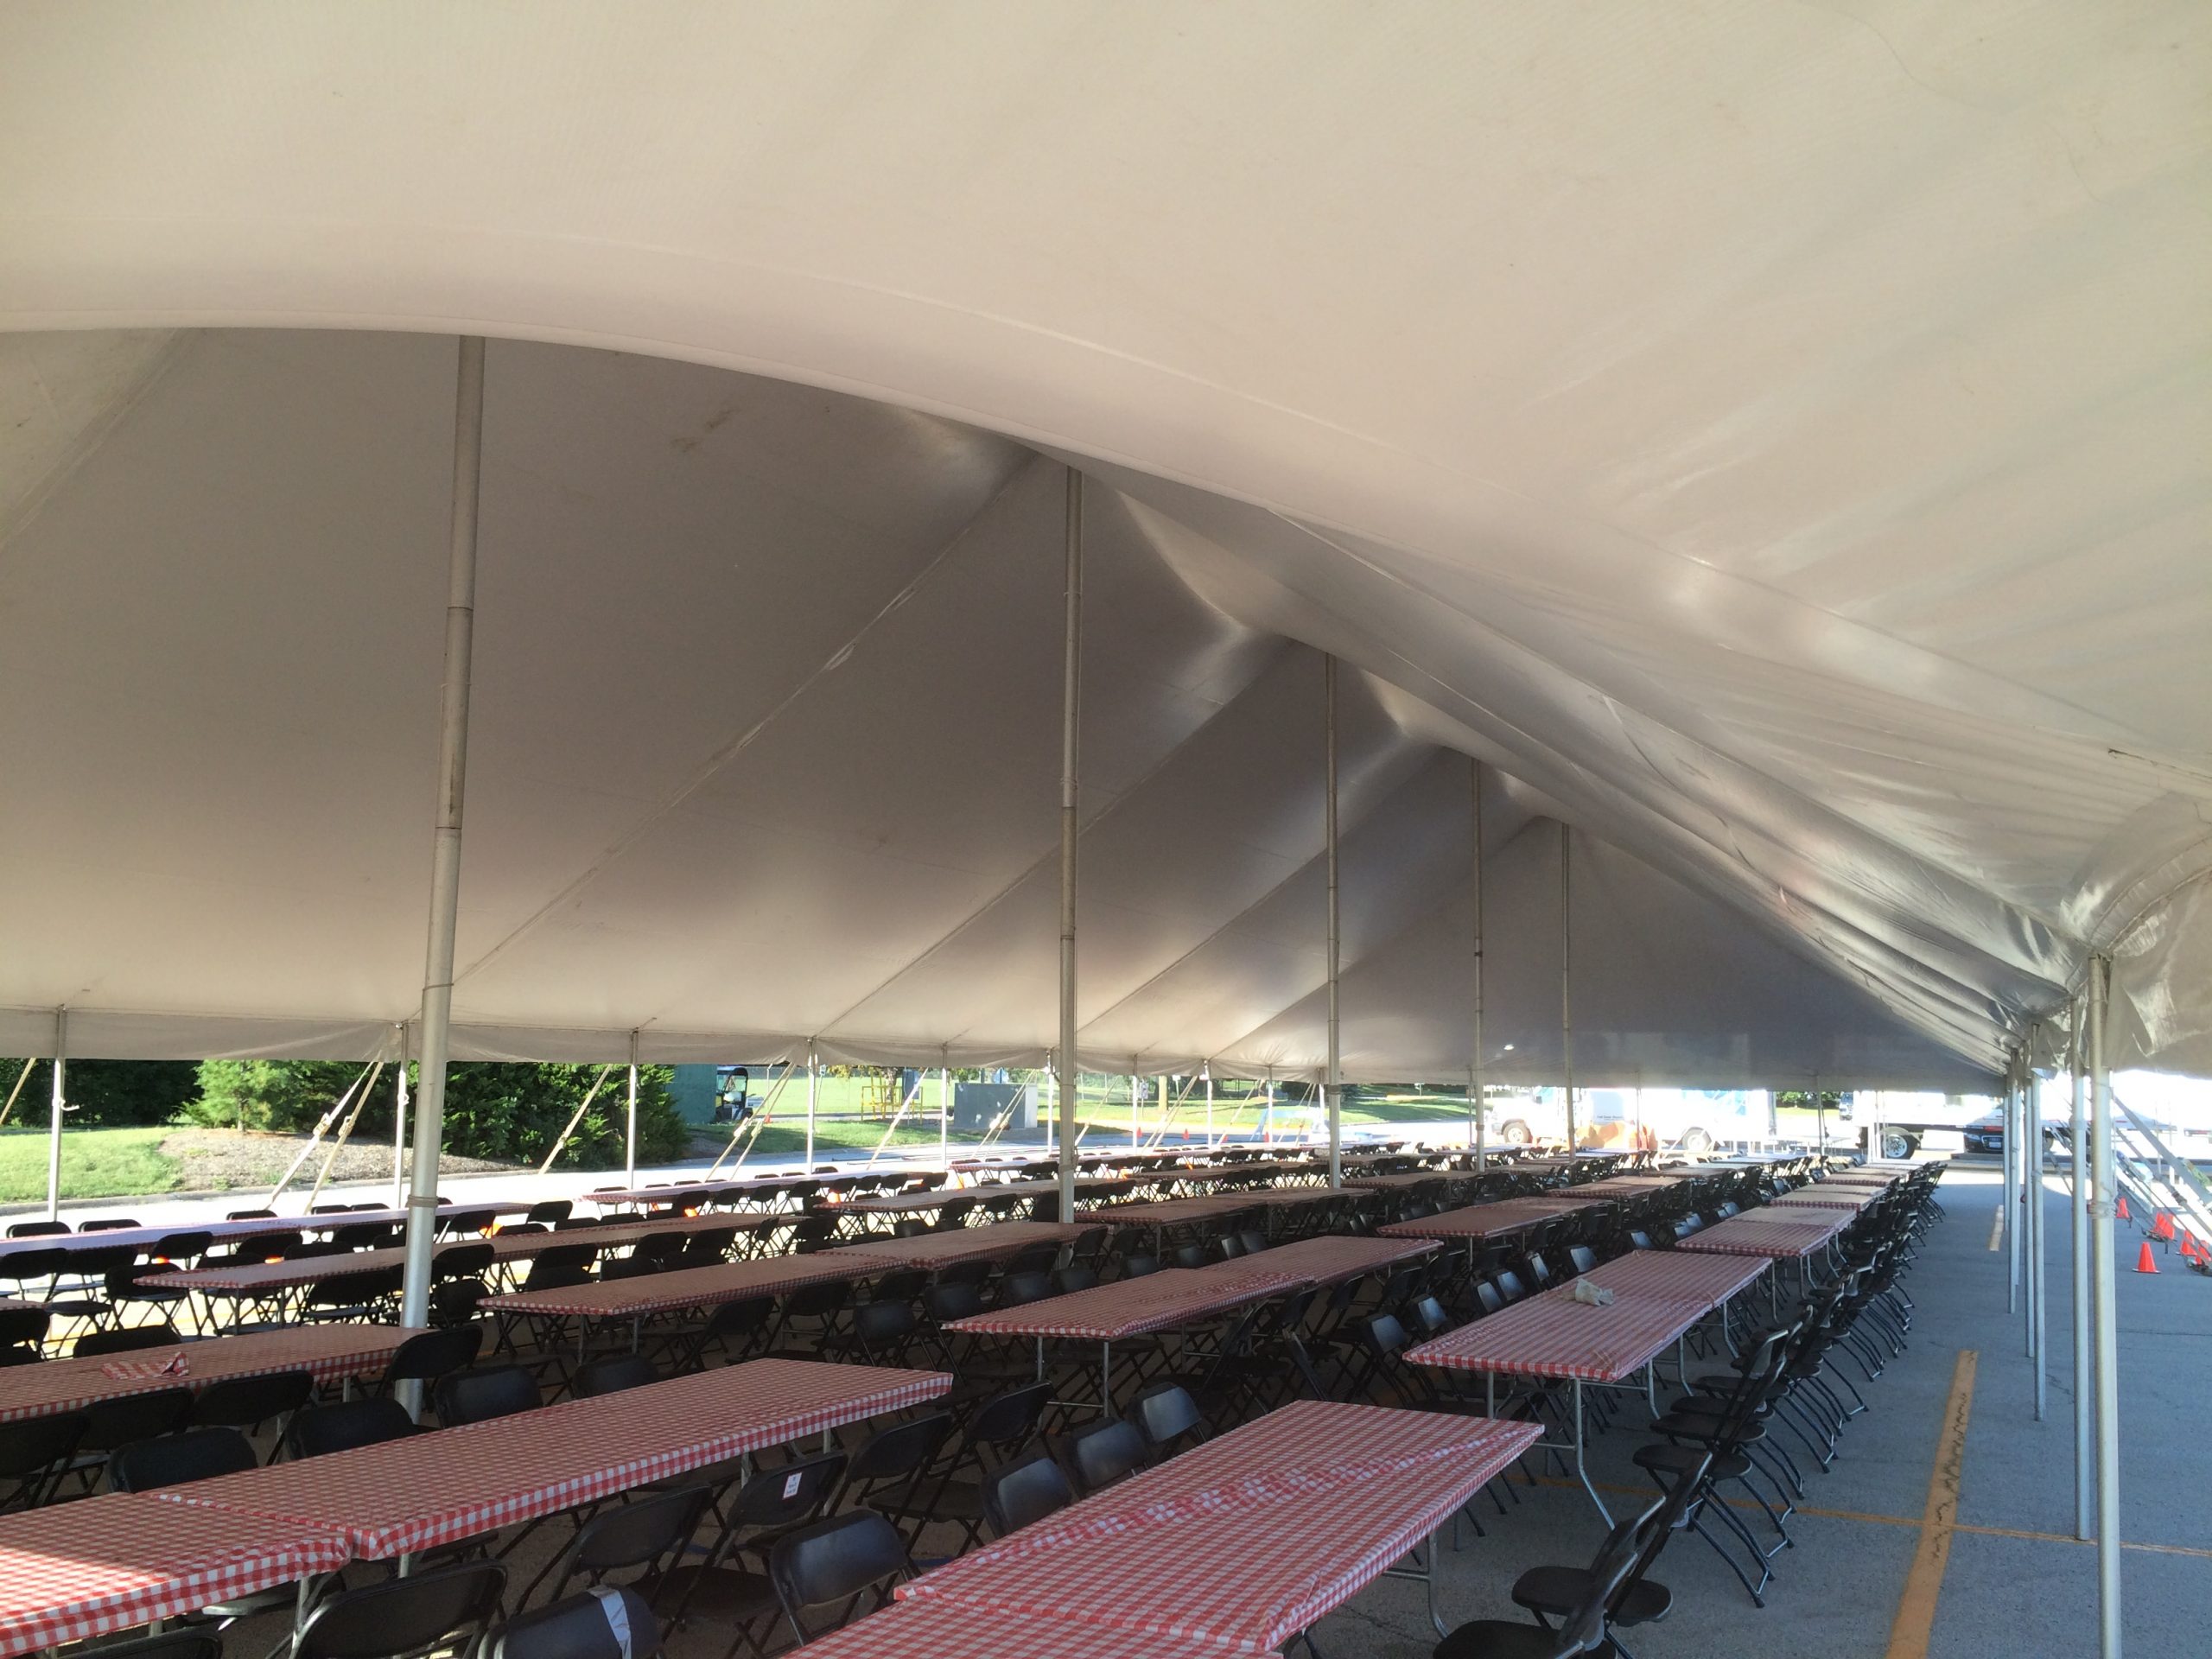 Under the 40′ x 120′ rope and pole tent with tables